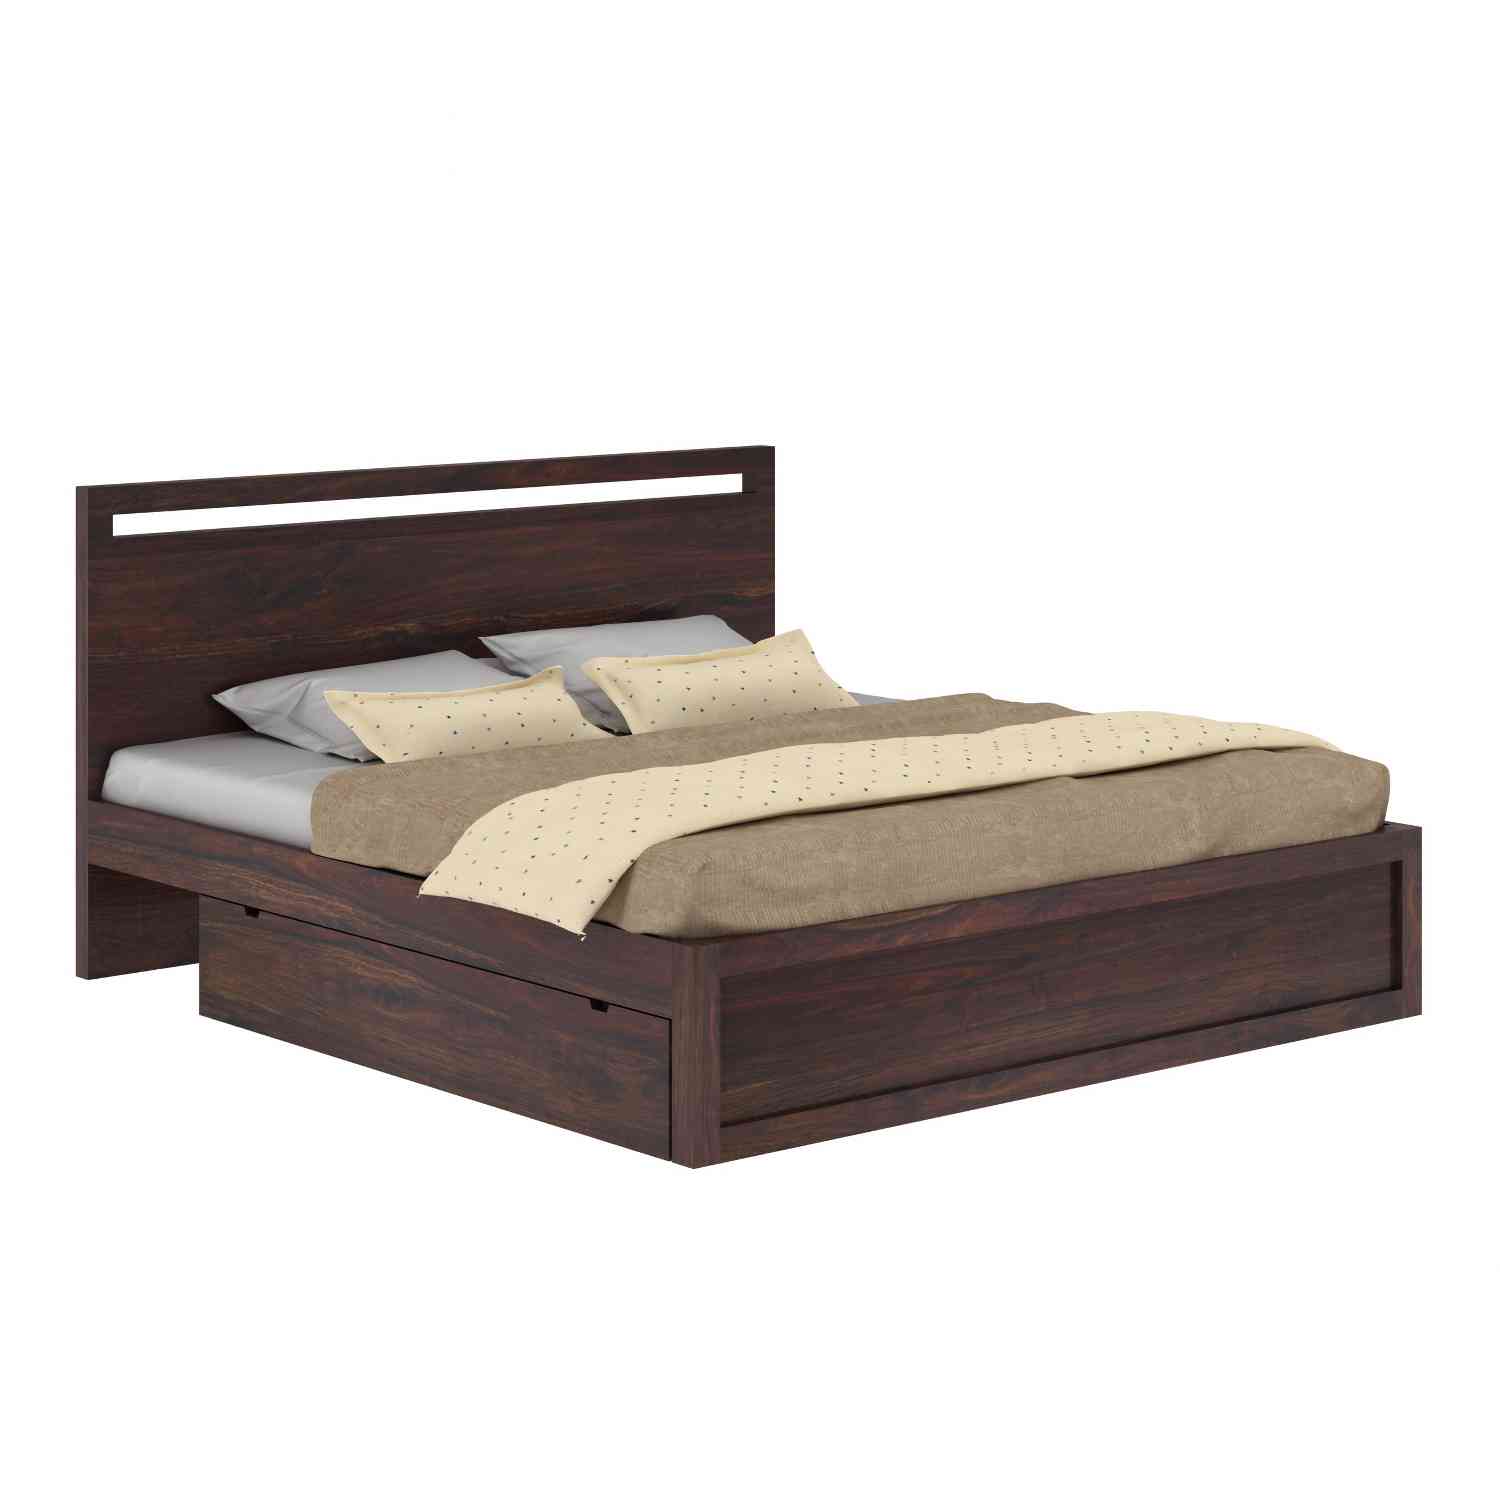 Livinn Solid Sheesham Wood Bed With Two Drawers (Queen Size, Walnut Finish)